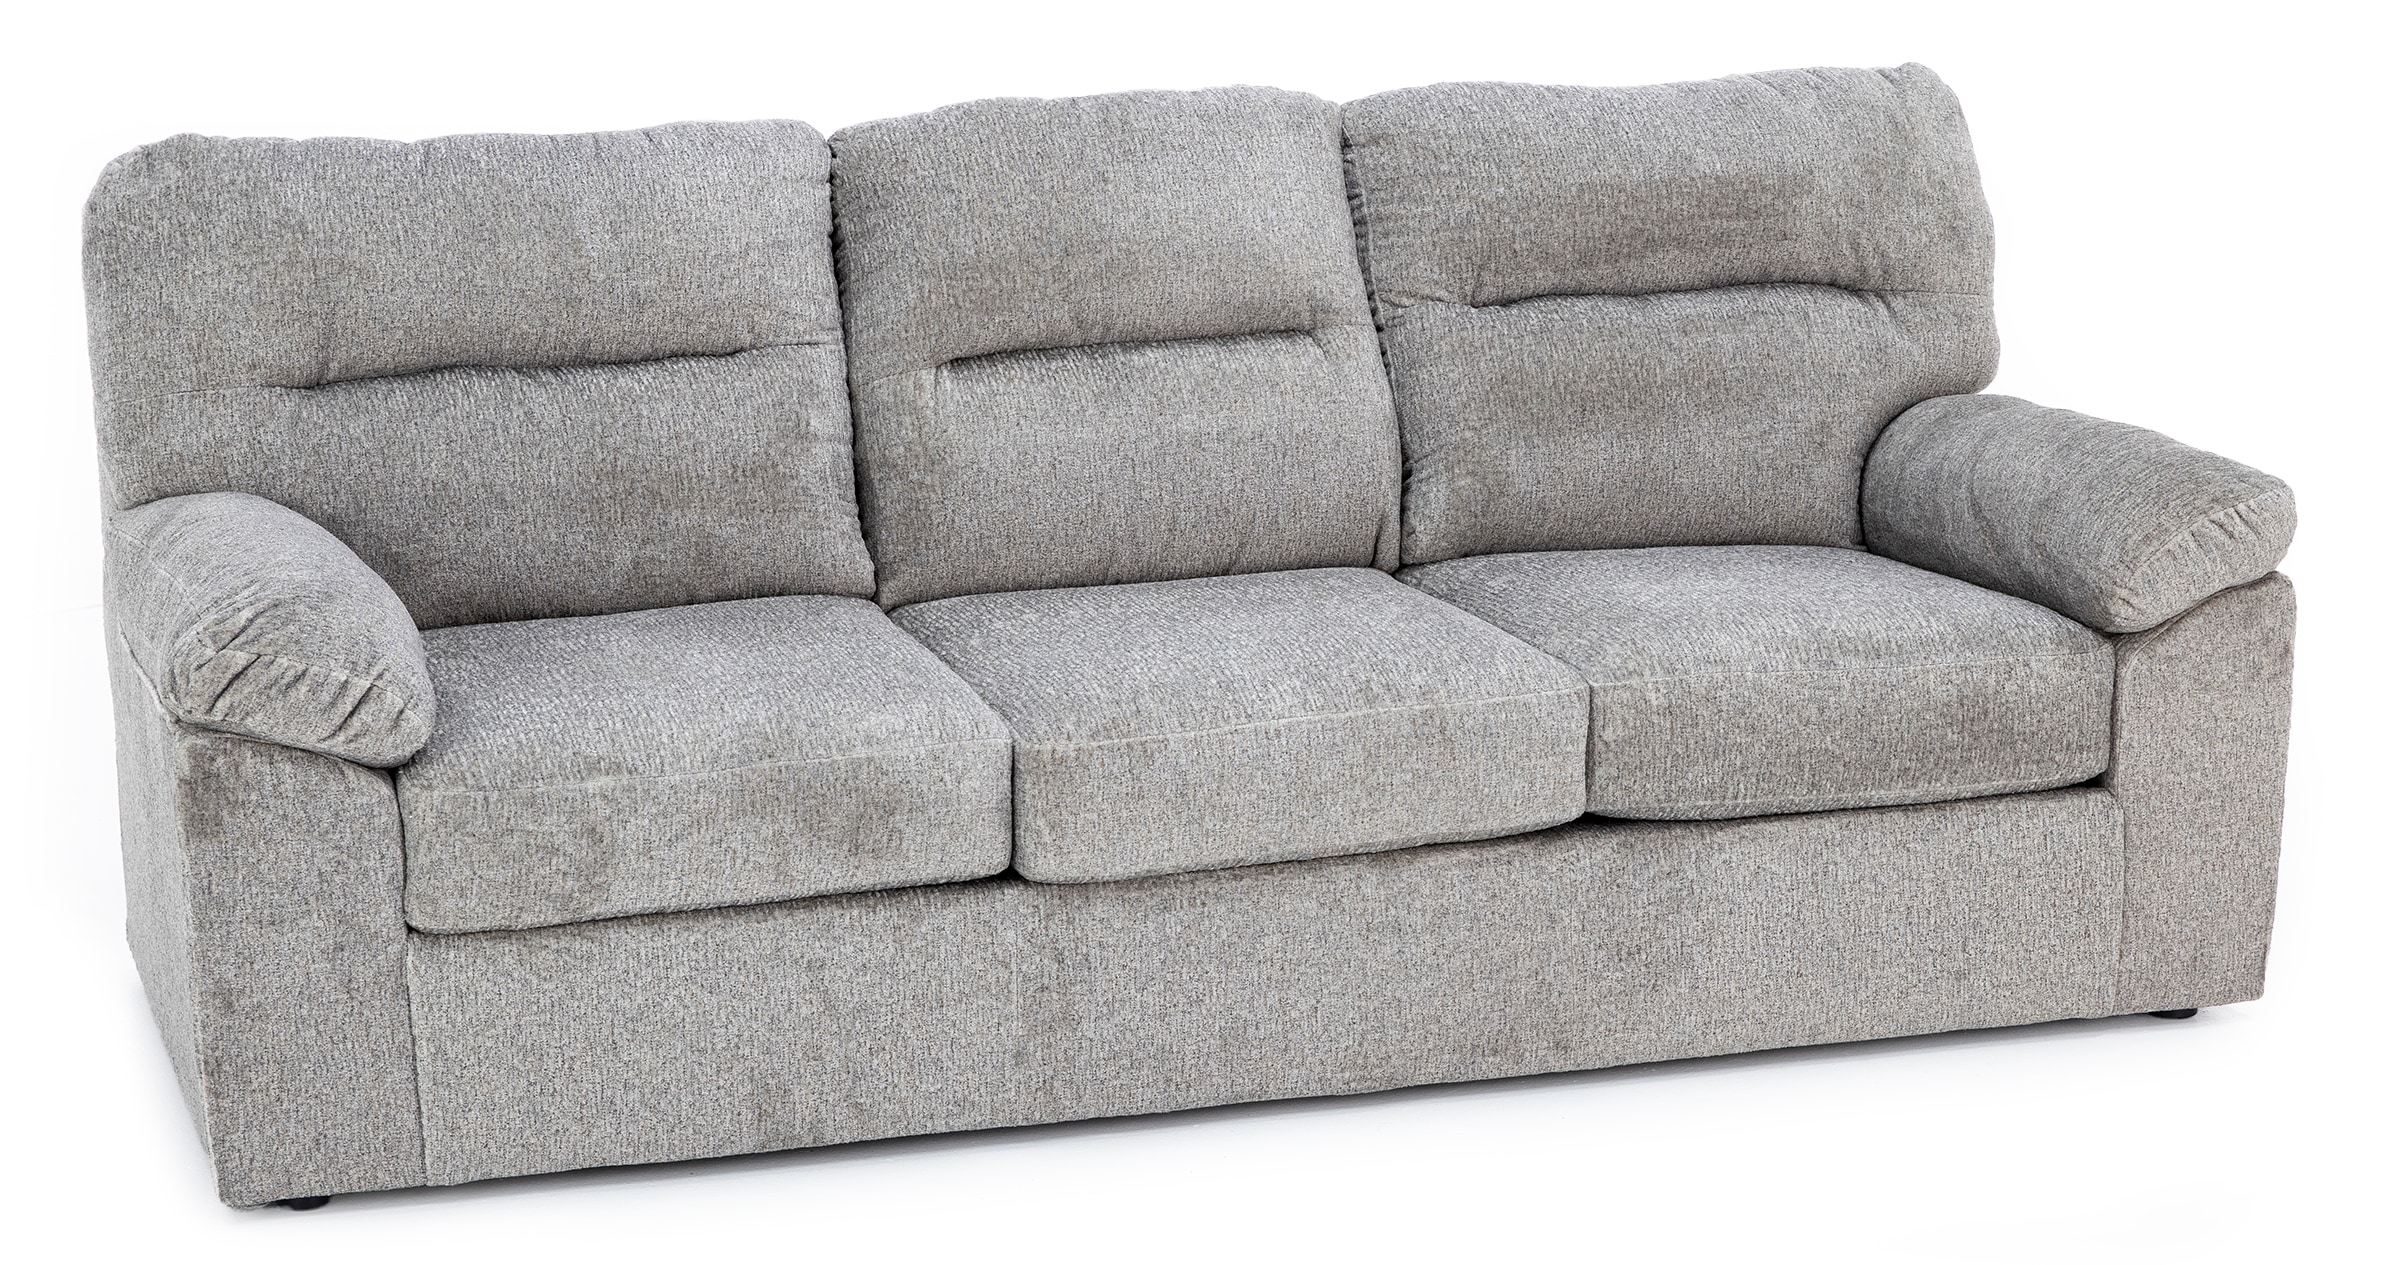 Jacen Sofa With Drop Down Table